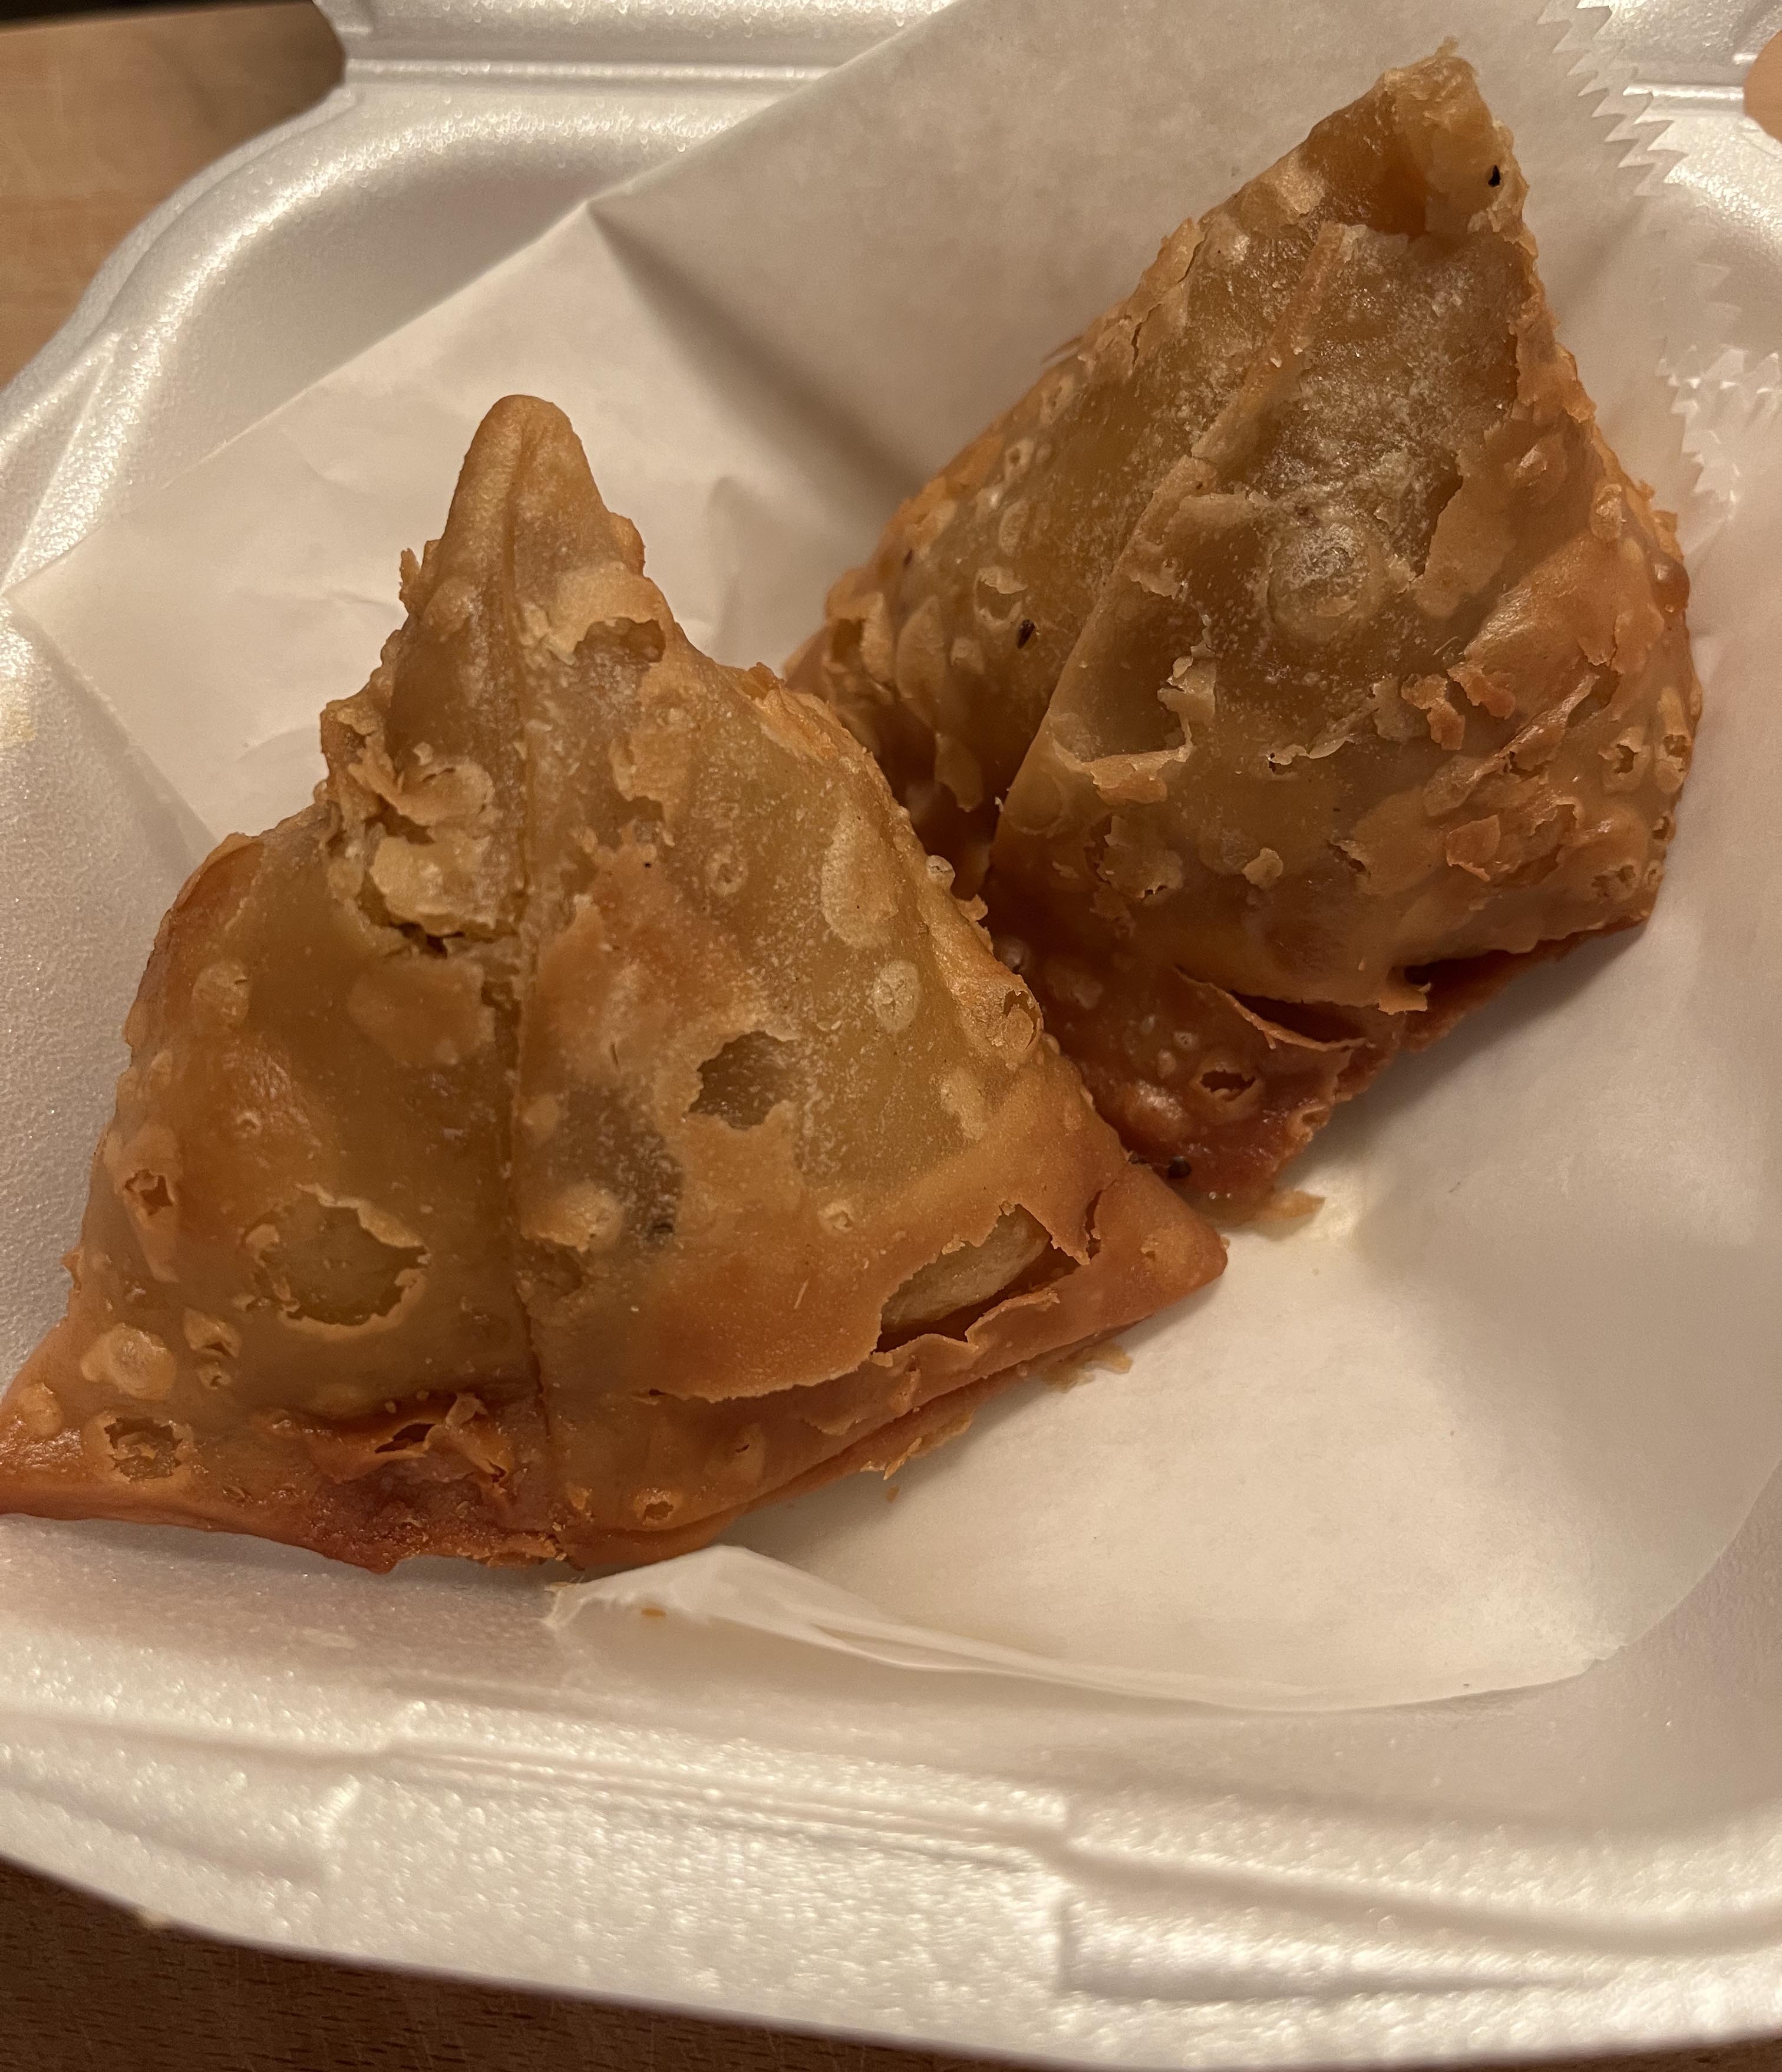 Two samosas in a styrofoam container from Stango Cuisine. Photo by Rafay Khan.